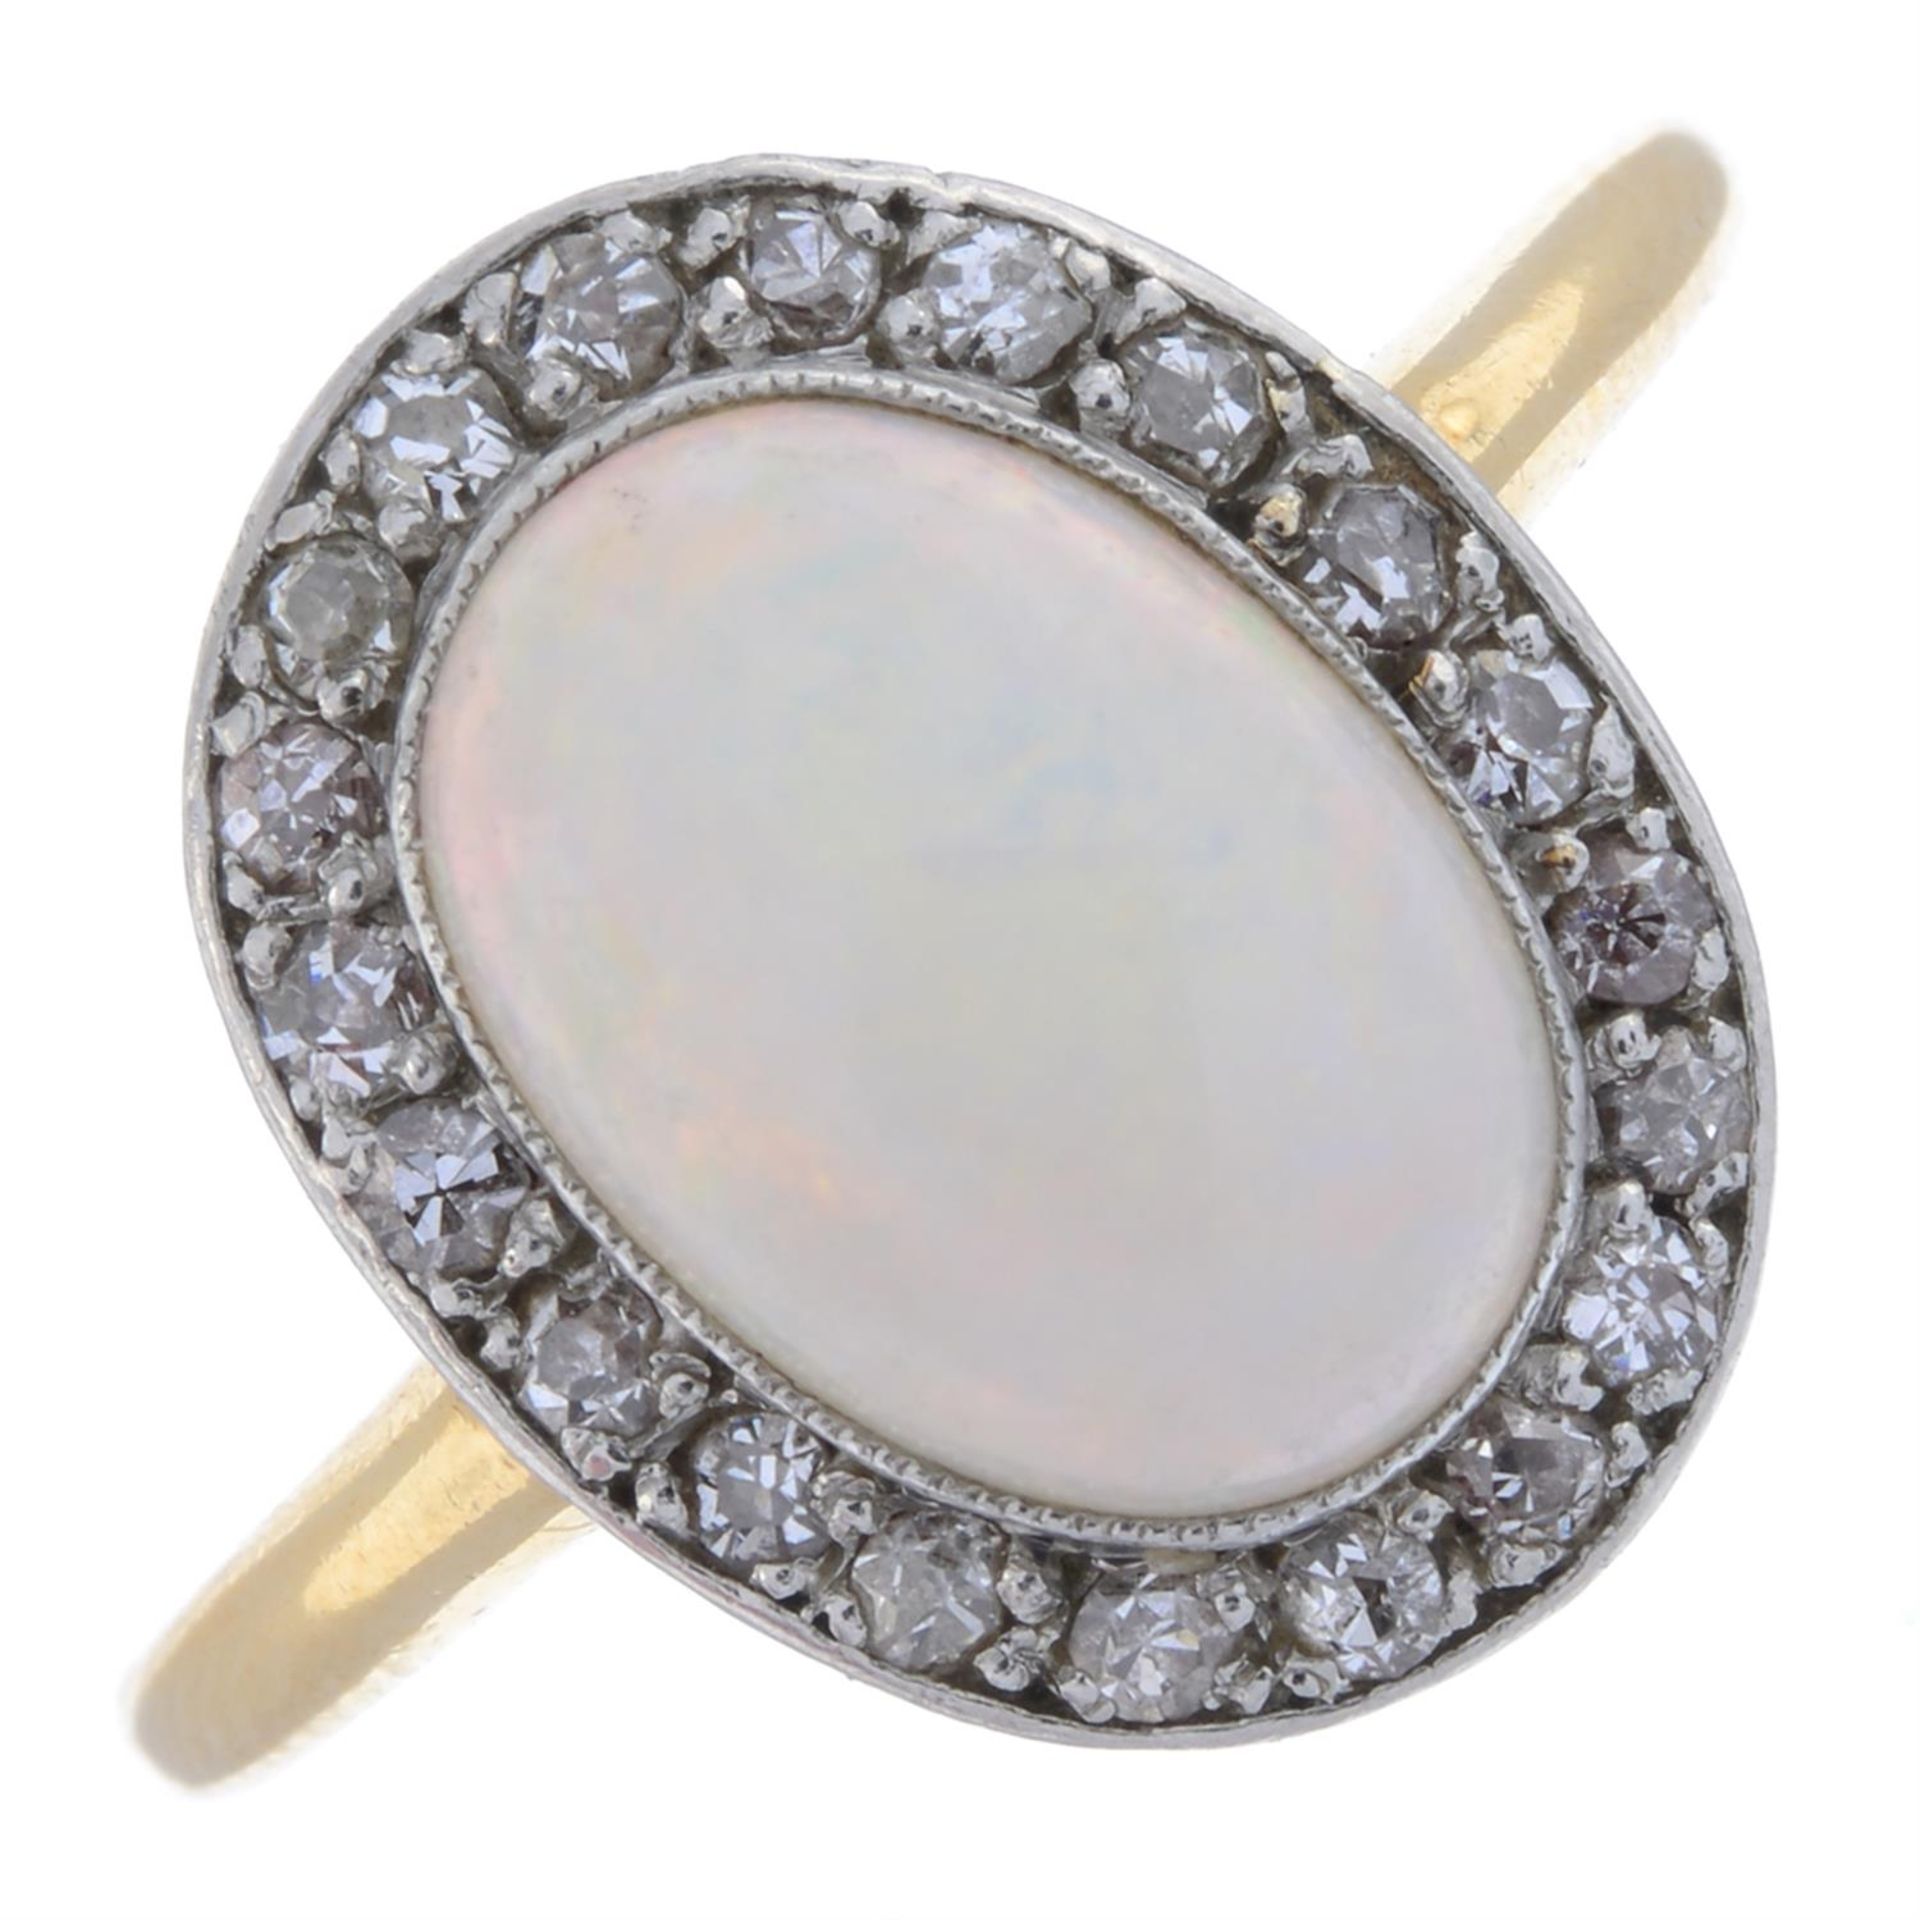 Early 20th century 18ct gold opal & diamond cluster ring